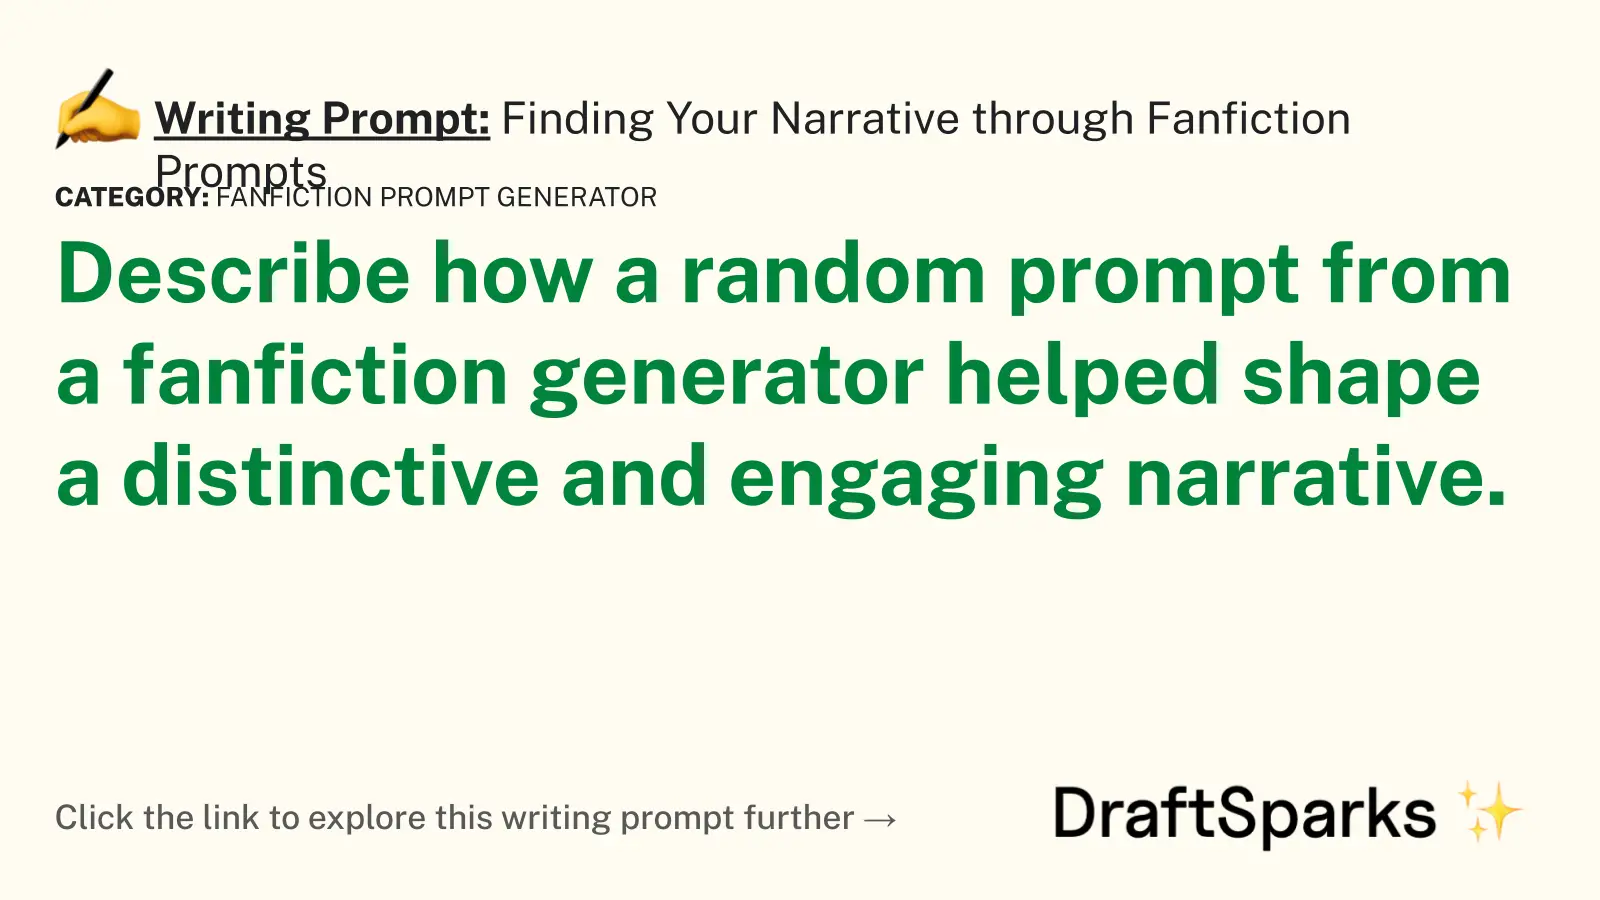 Finding Your Narrative through Fanfiction Prompts